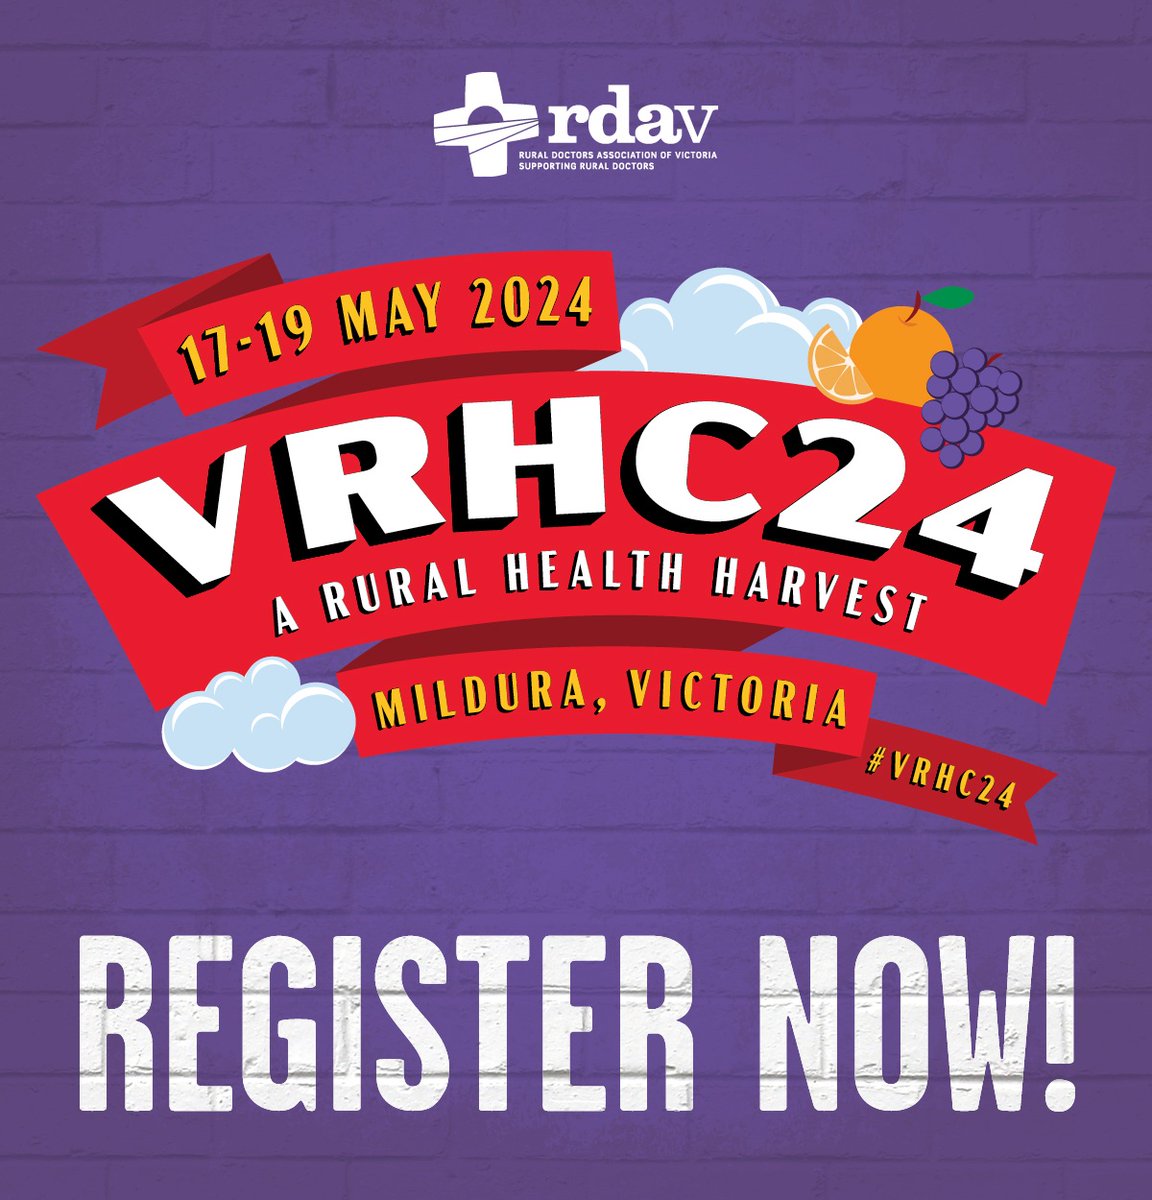 RDAV thanks our Silver Partners for the upcoming Victorian Rural Health Conference in Mildura - @VicRGProgram & @MurrayPHN Join us to learn about what they are currently working on & how your practice/service could benefit. Register now for #VRHC24 bit.ly/476kxt4